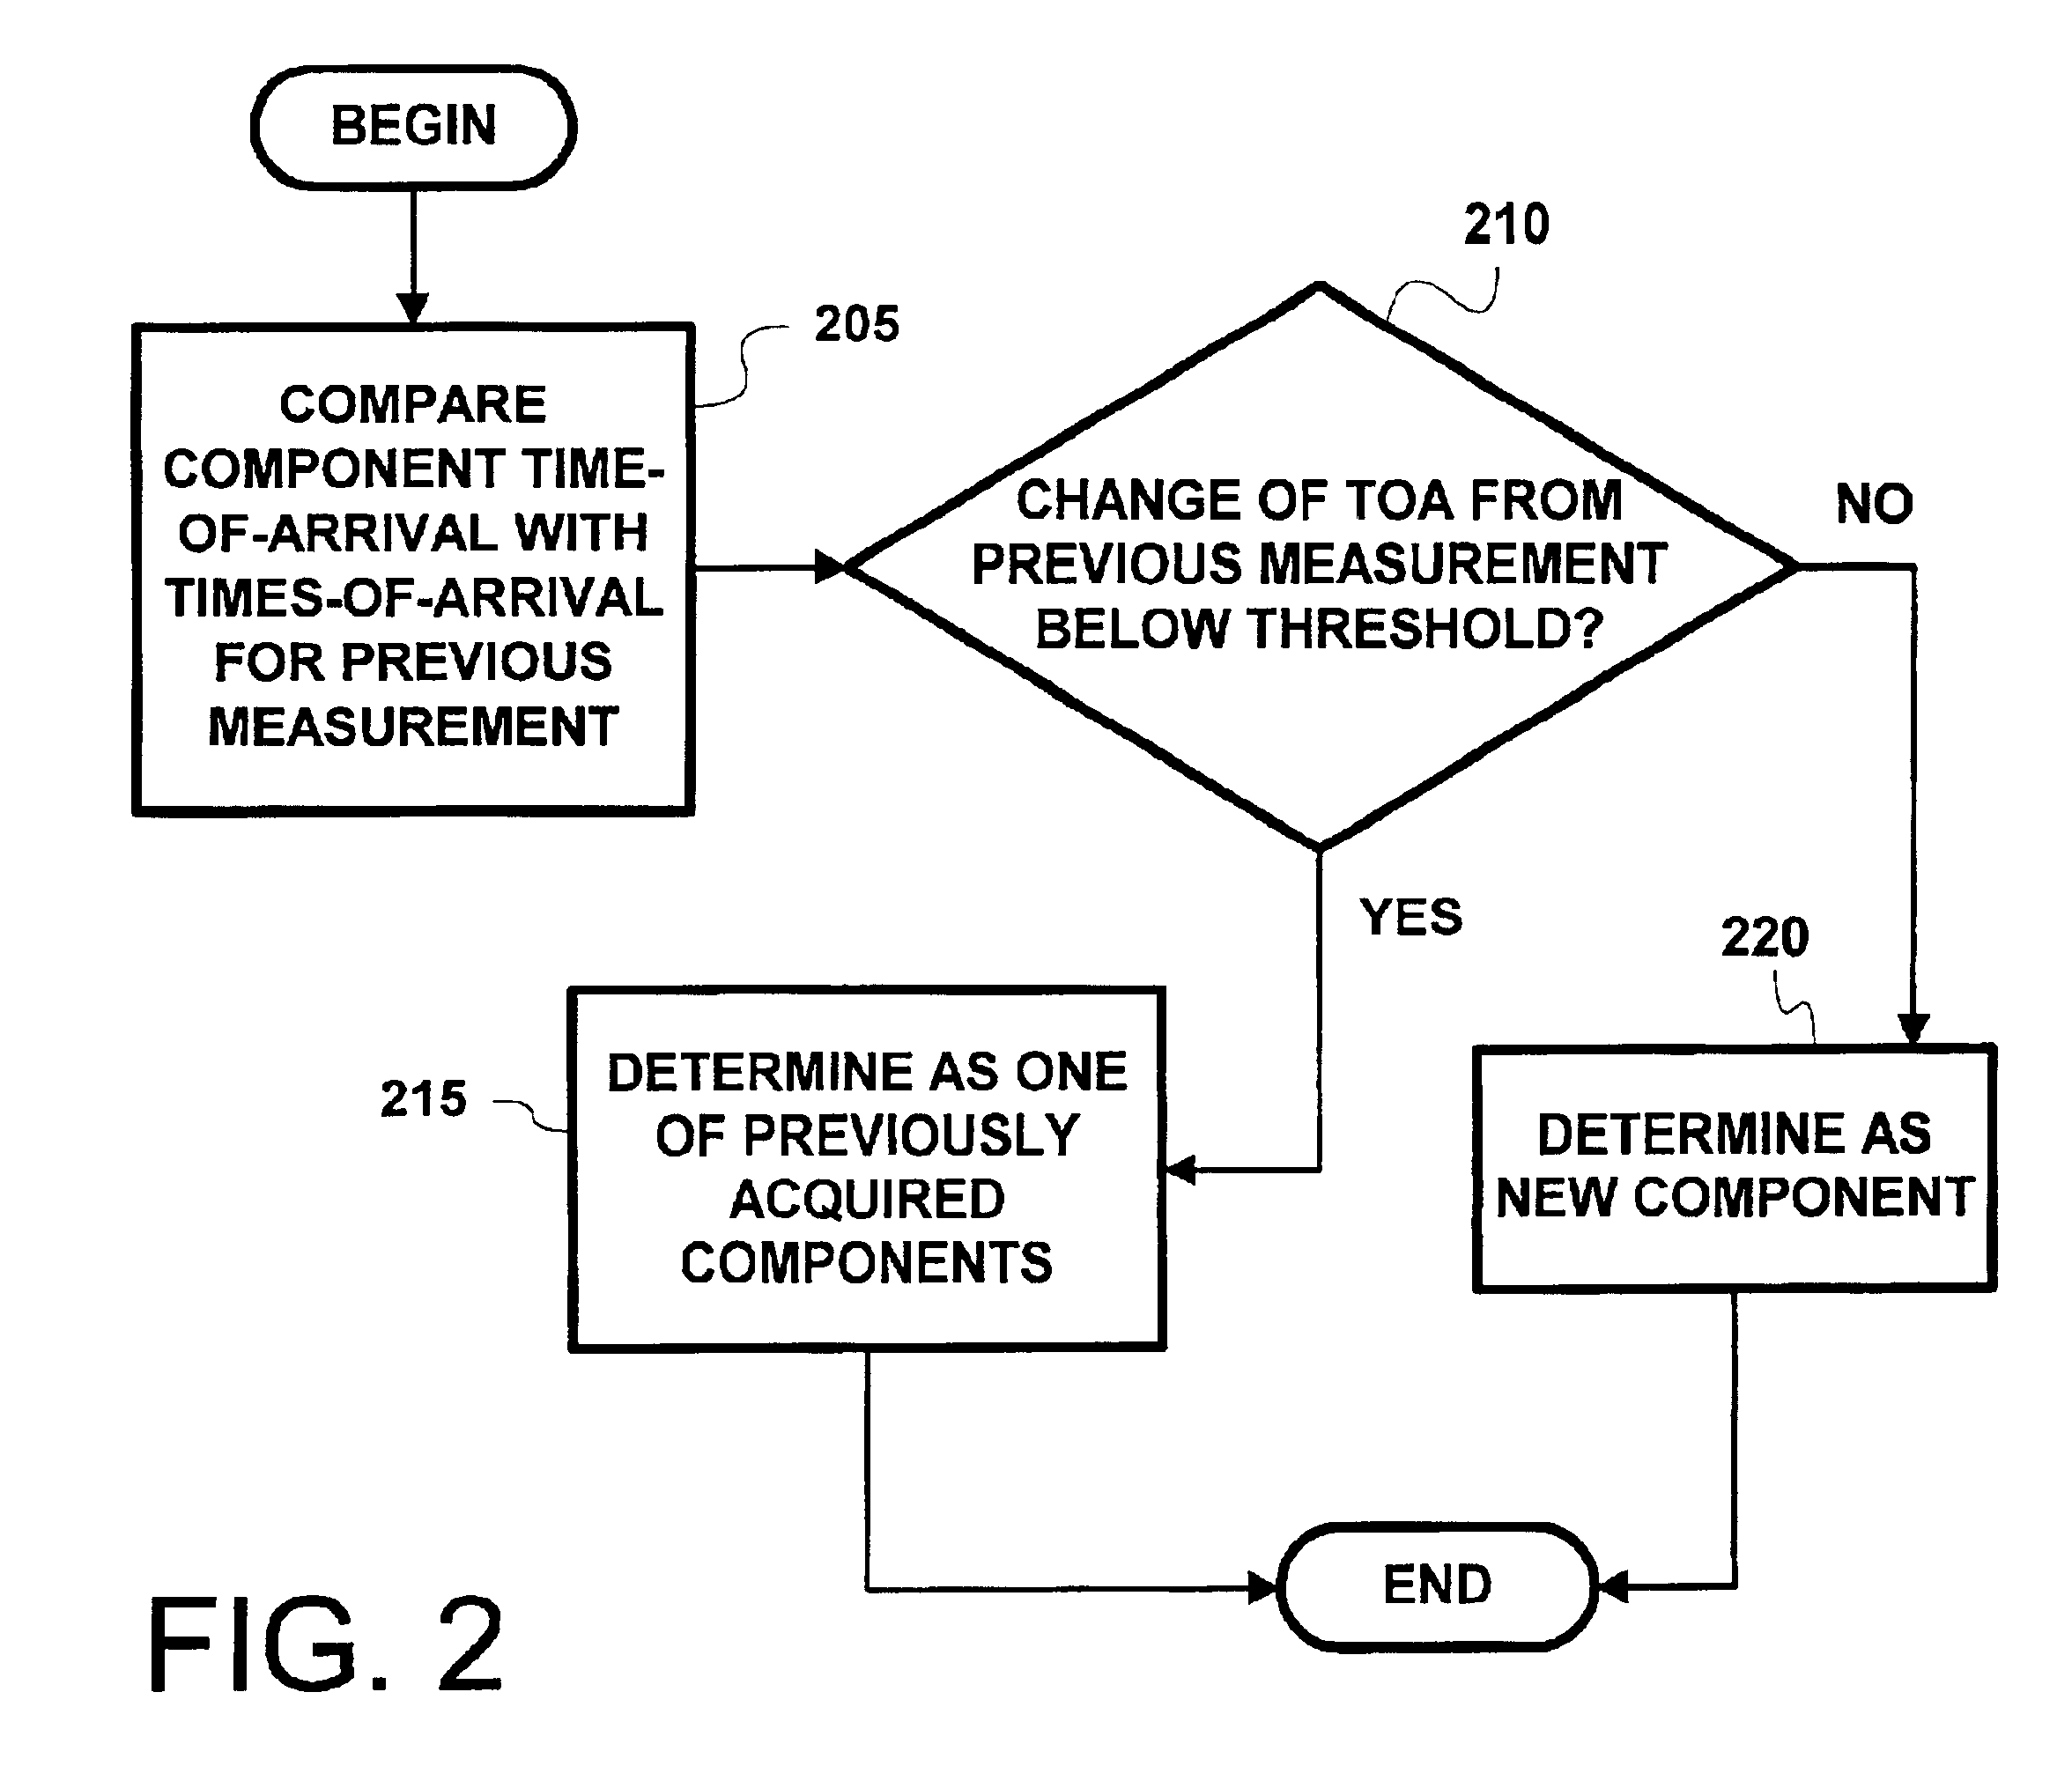 Method and apparatus for co-channel interference measurements and base station color code decoding for drive tests in TDMA, cellular, and PCS networks